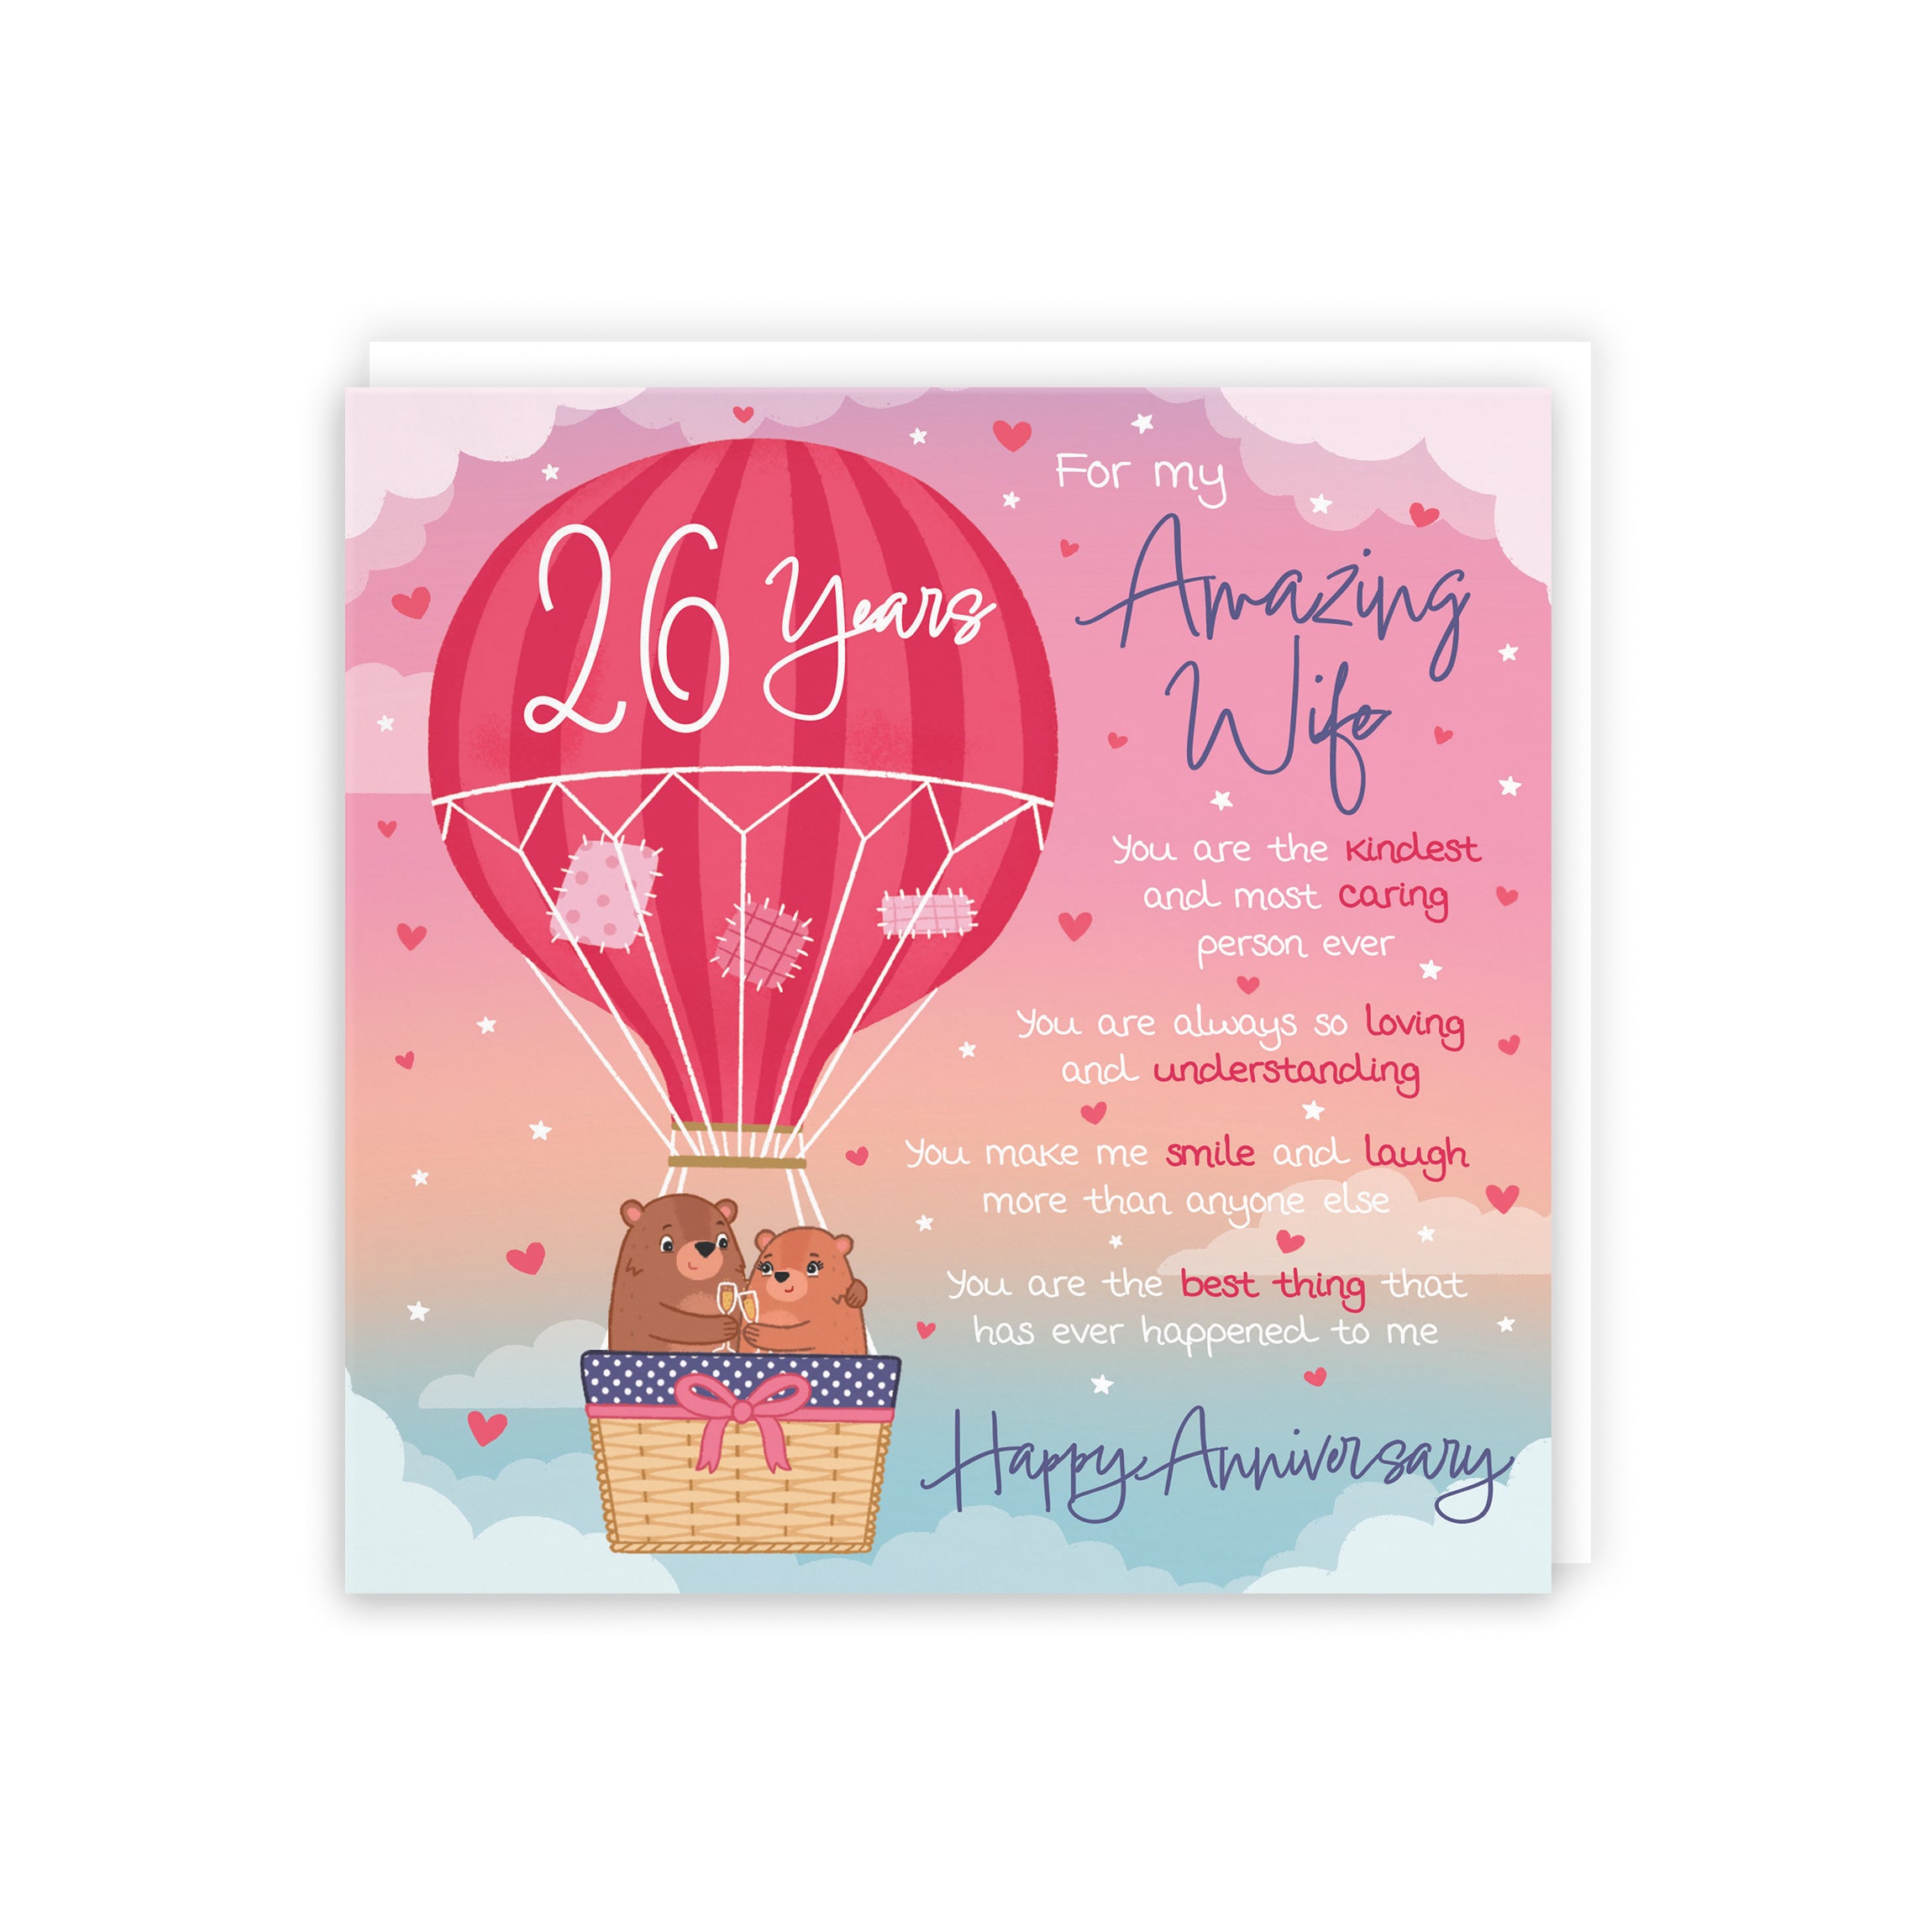 Wife 26th Anniversary Poem Card Love Is In The Air Cute Bears